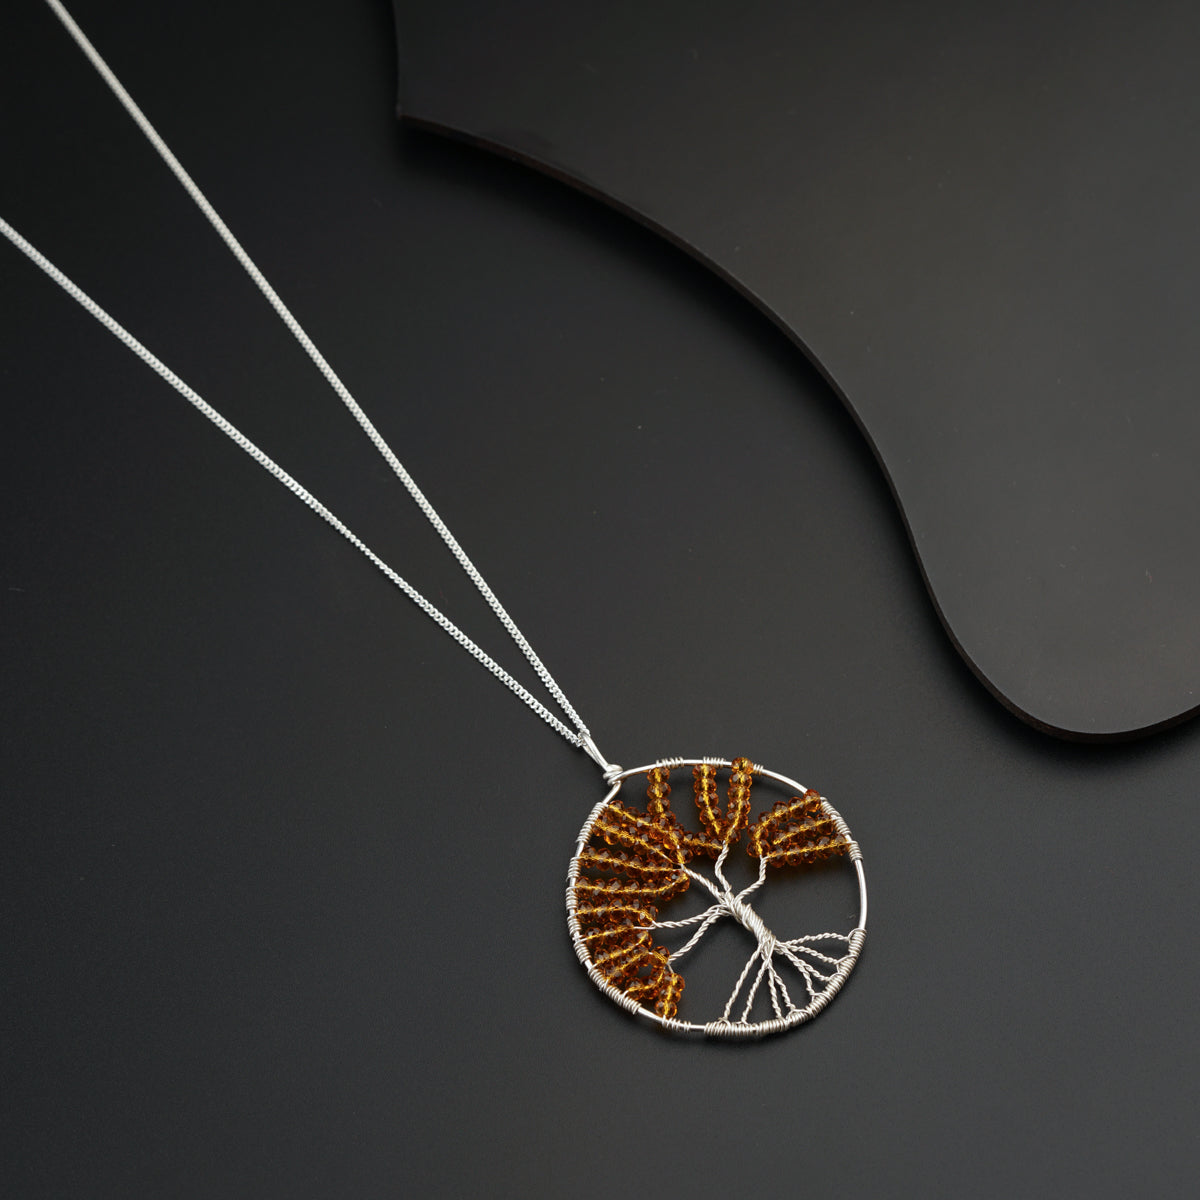 a necklace with a tree of life design on it